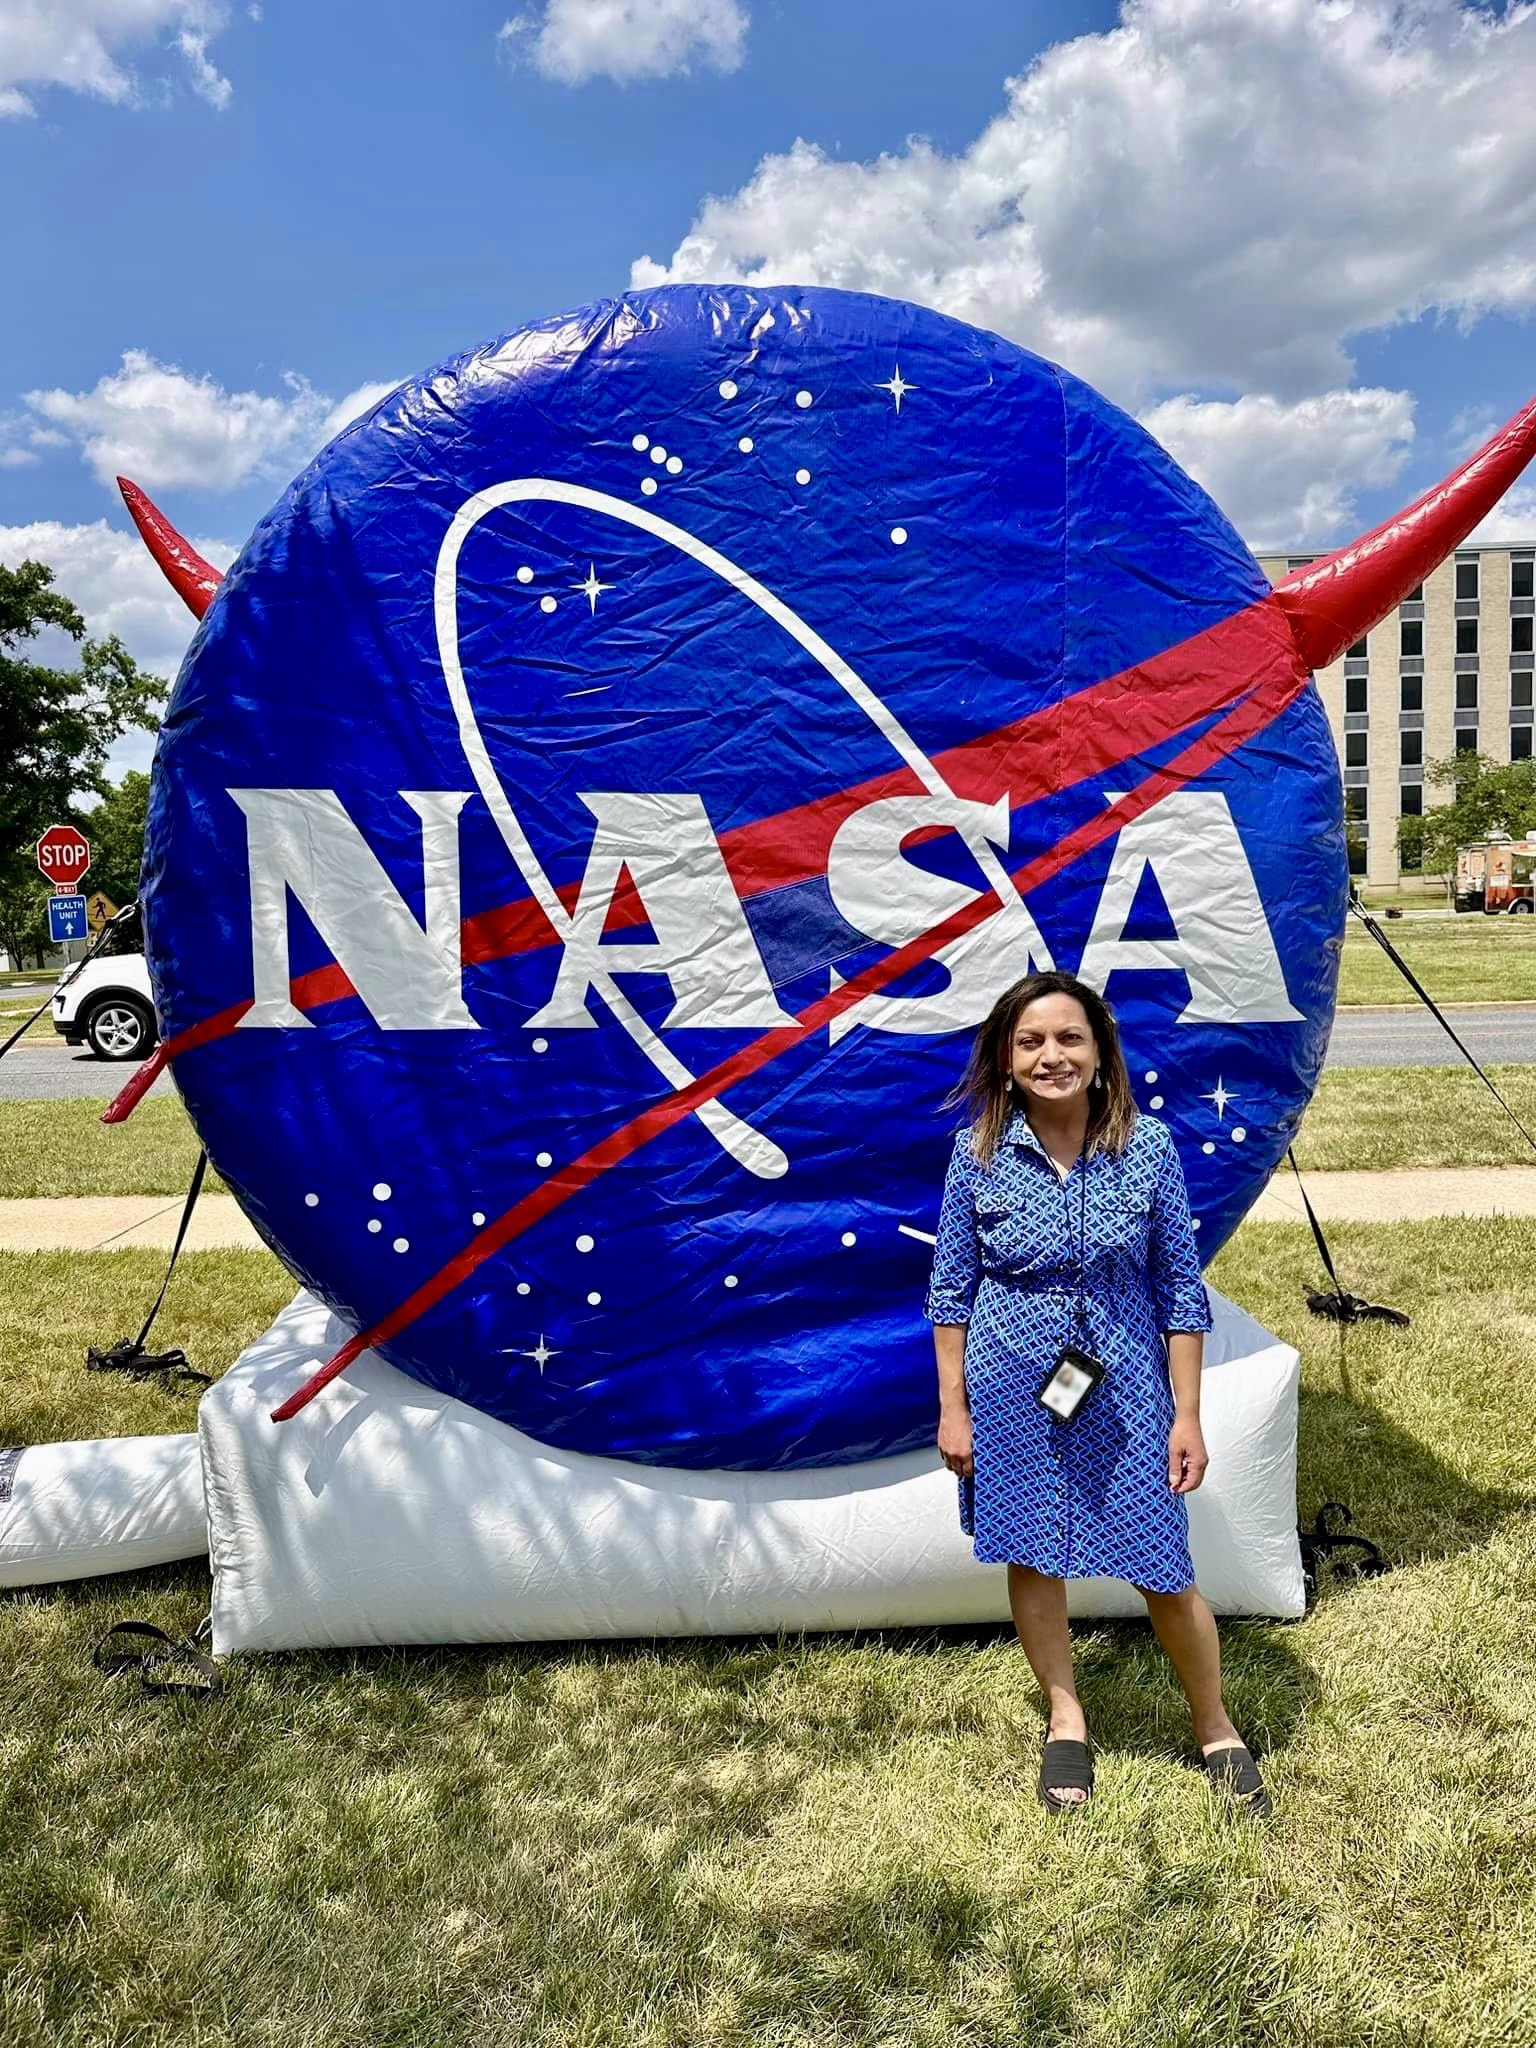 Rita Owens, a woman with shoulder-length, light brown hair, smiles and stands in front of a large inflatable shaped like the NASA logo. It is a large, bright blue circle dotted with stars and crossed by a red, V-shaped swoosh. 